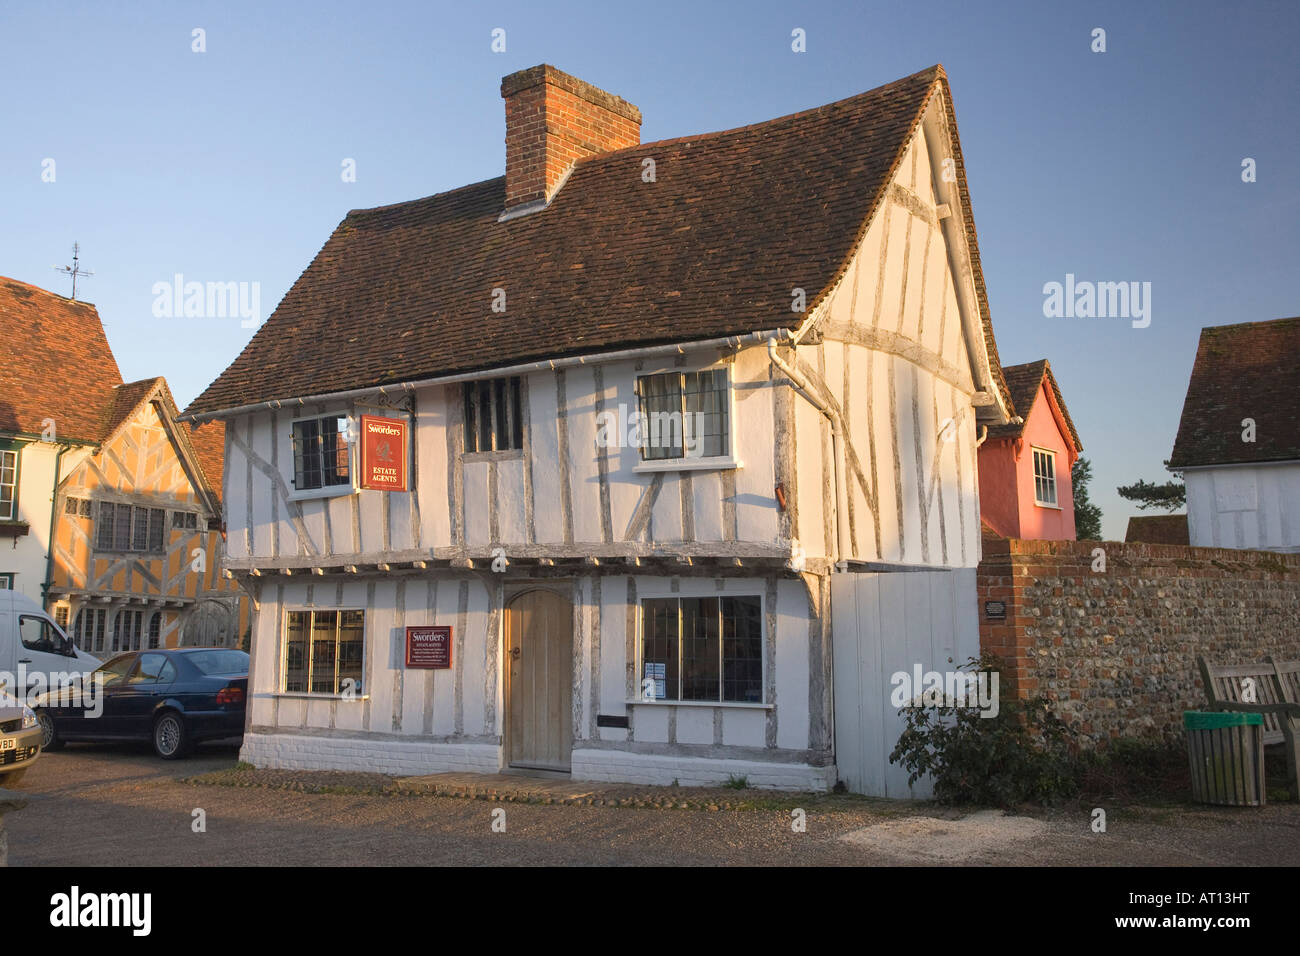 traditional timber frame house in centre of the market square in Lavenham, Suffolk, UK, 2008 Stock Photo